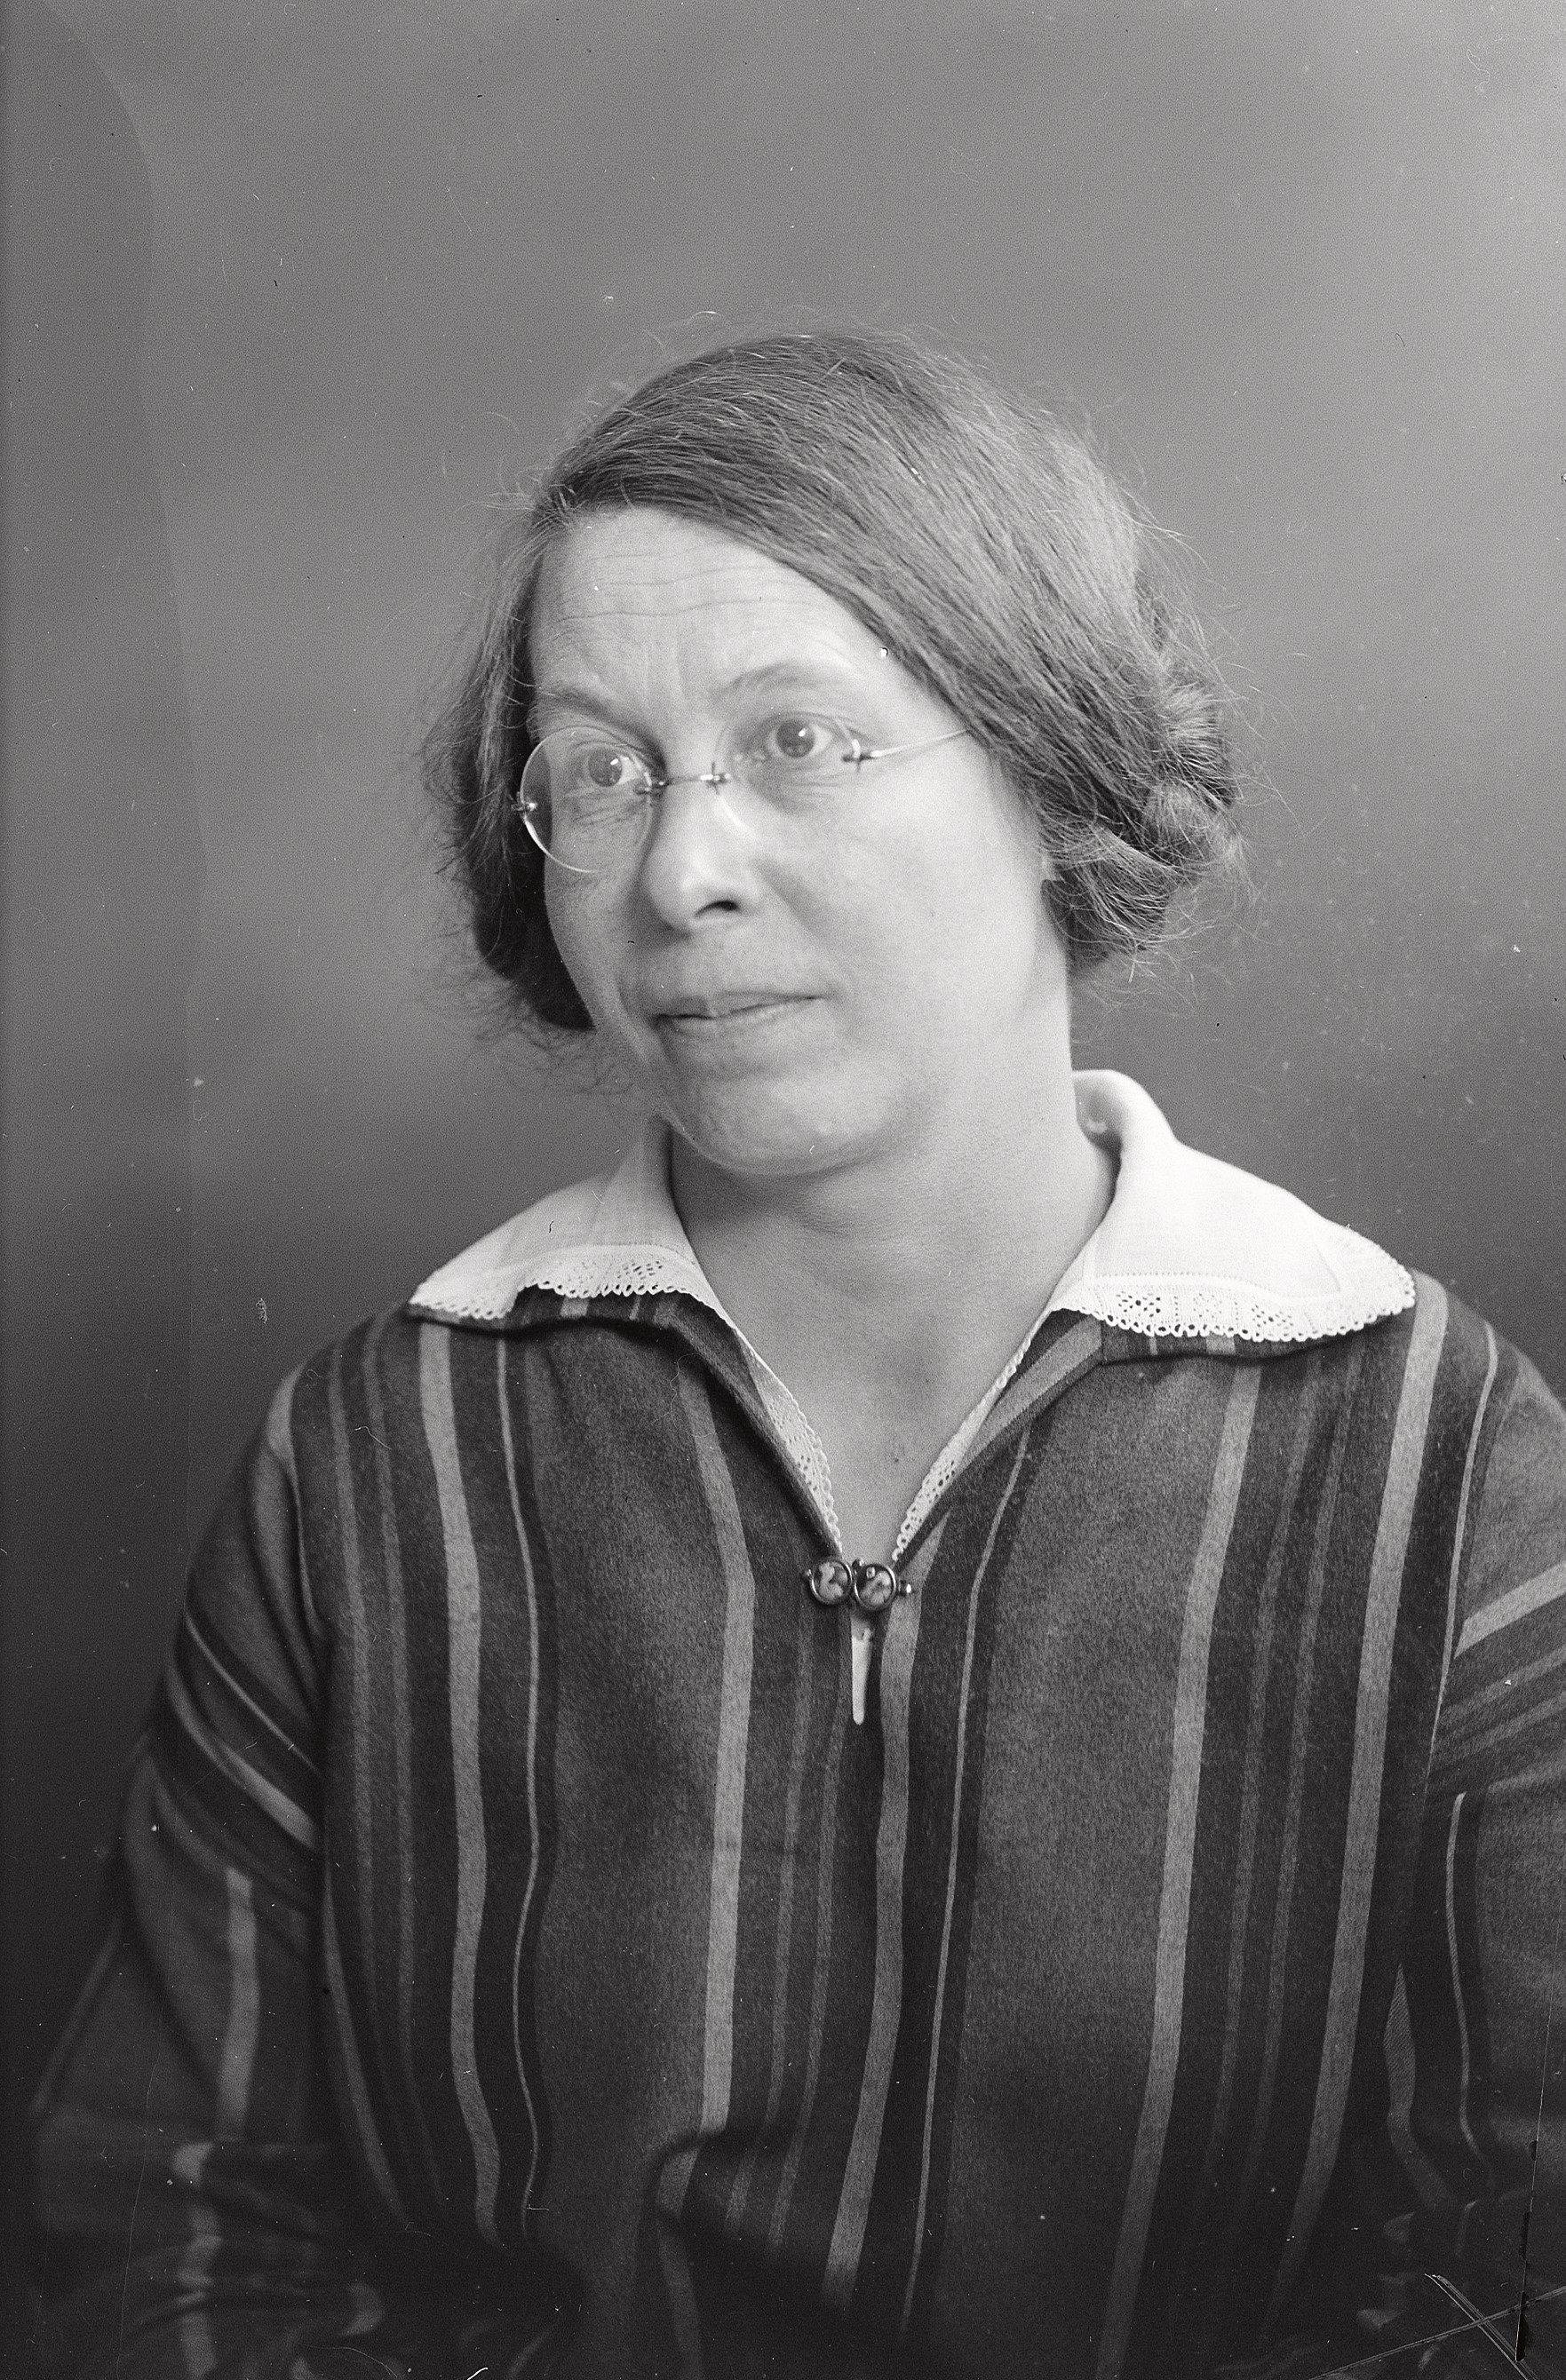 Lisa Rolf, 1928. Photo: Per Bagge (1866-1936), detail. Lund University Library, 12426